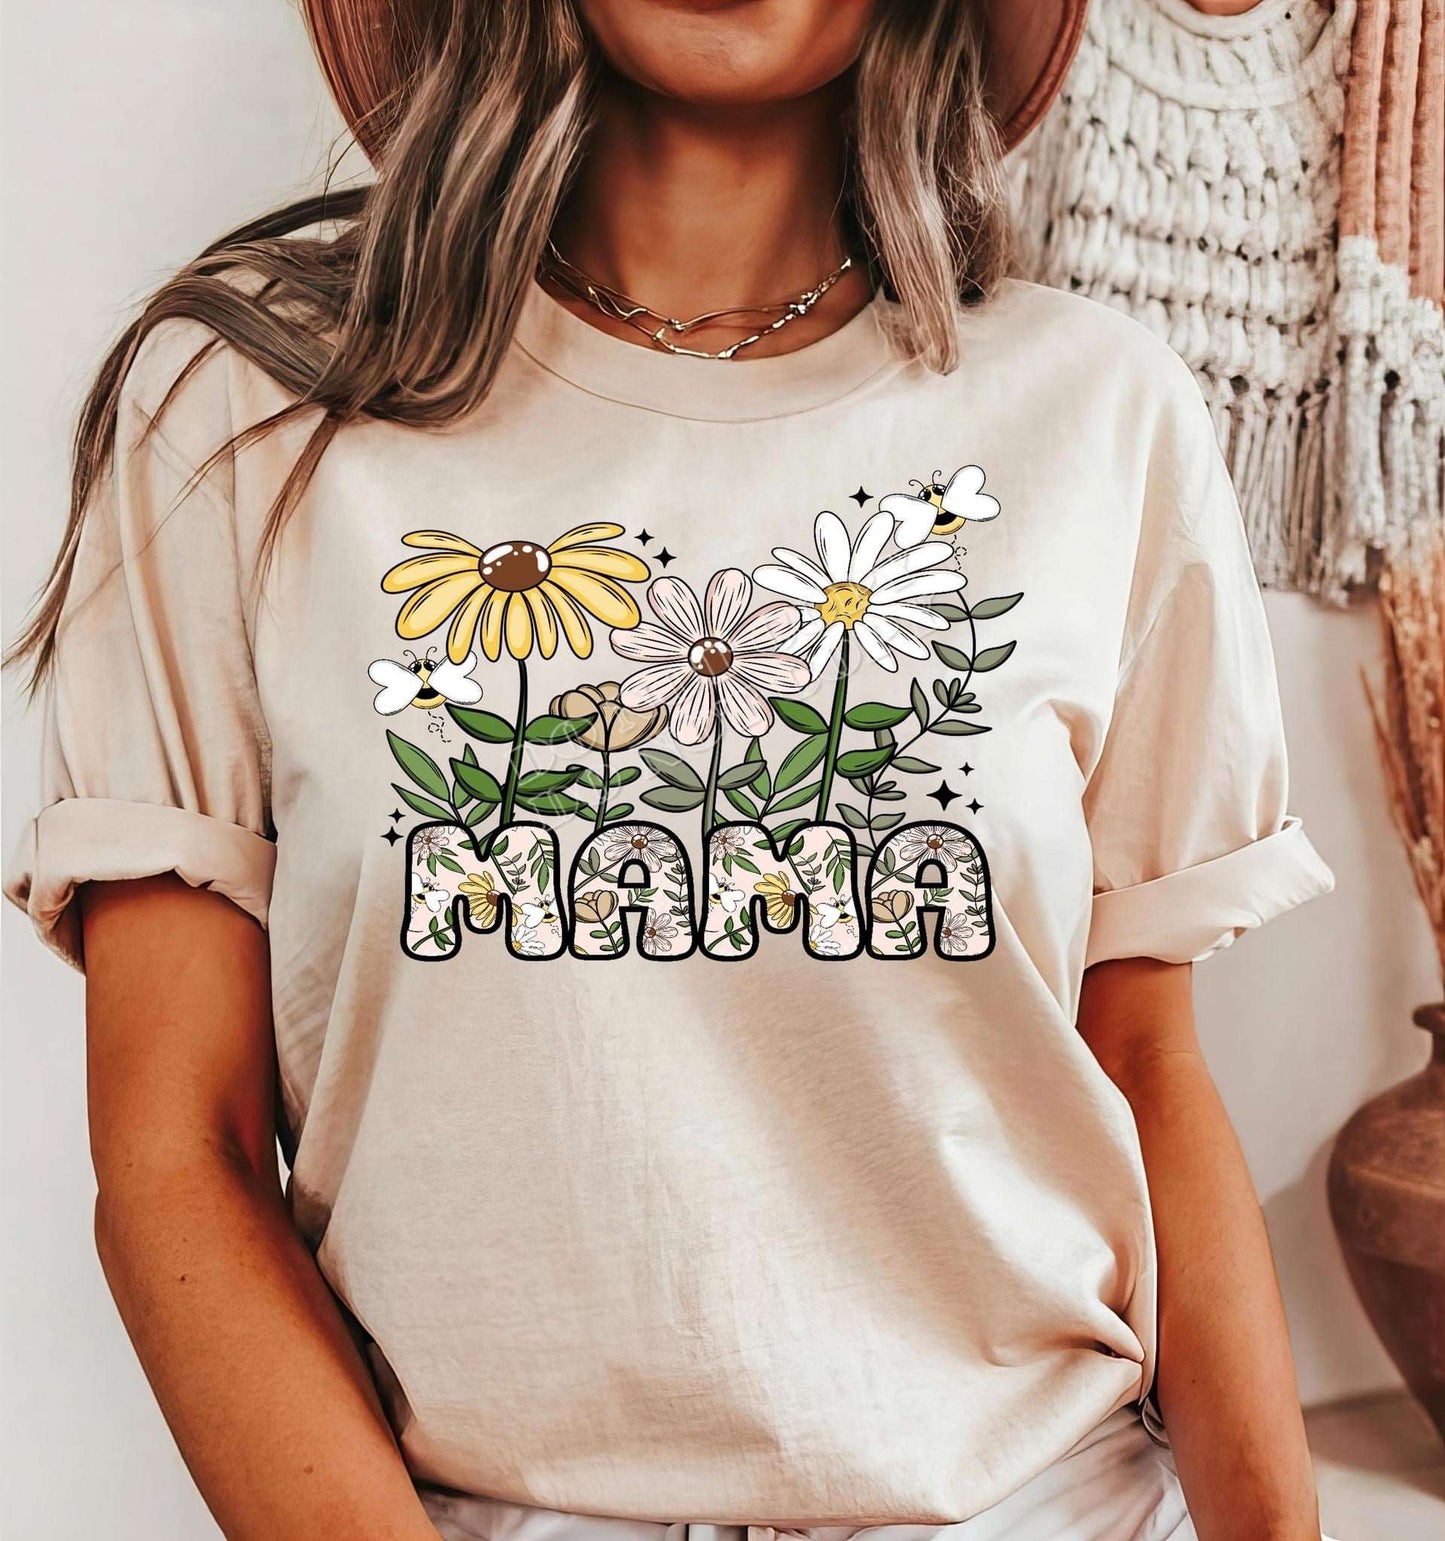 Celebrate Mom: 'Mama Perfect' Tee with Daisy Floral Design for Mother's Day Mother’s Day Collection T-Shirt 17 Daisy Designs & Creations LLC